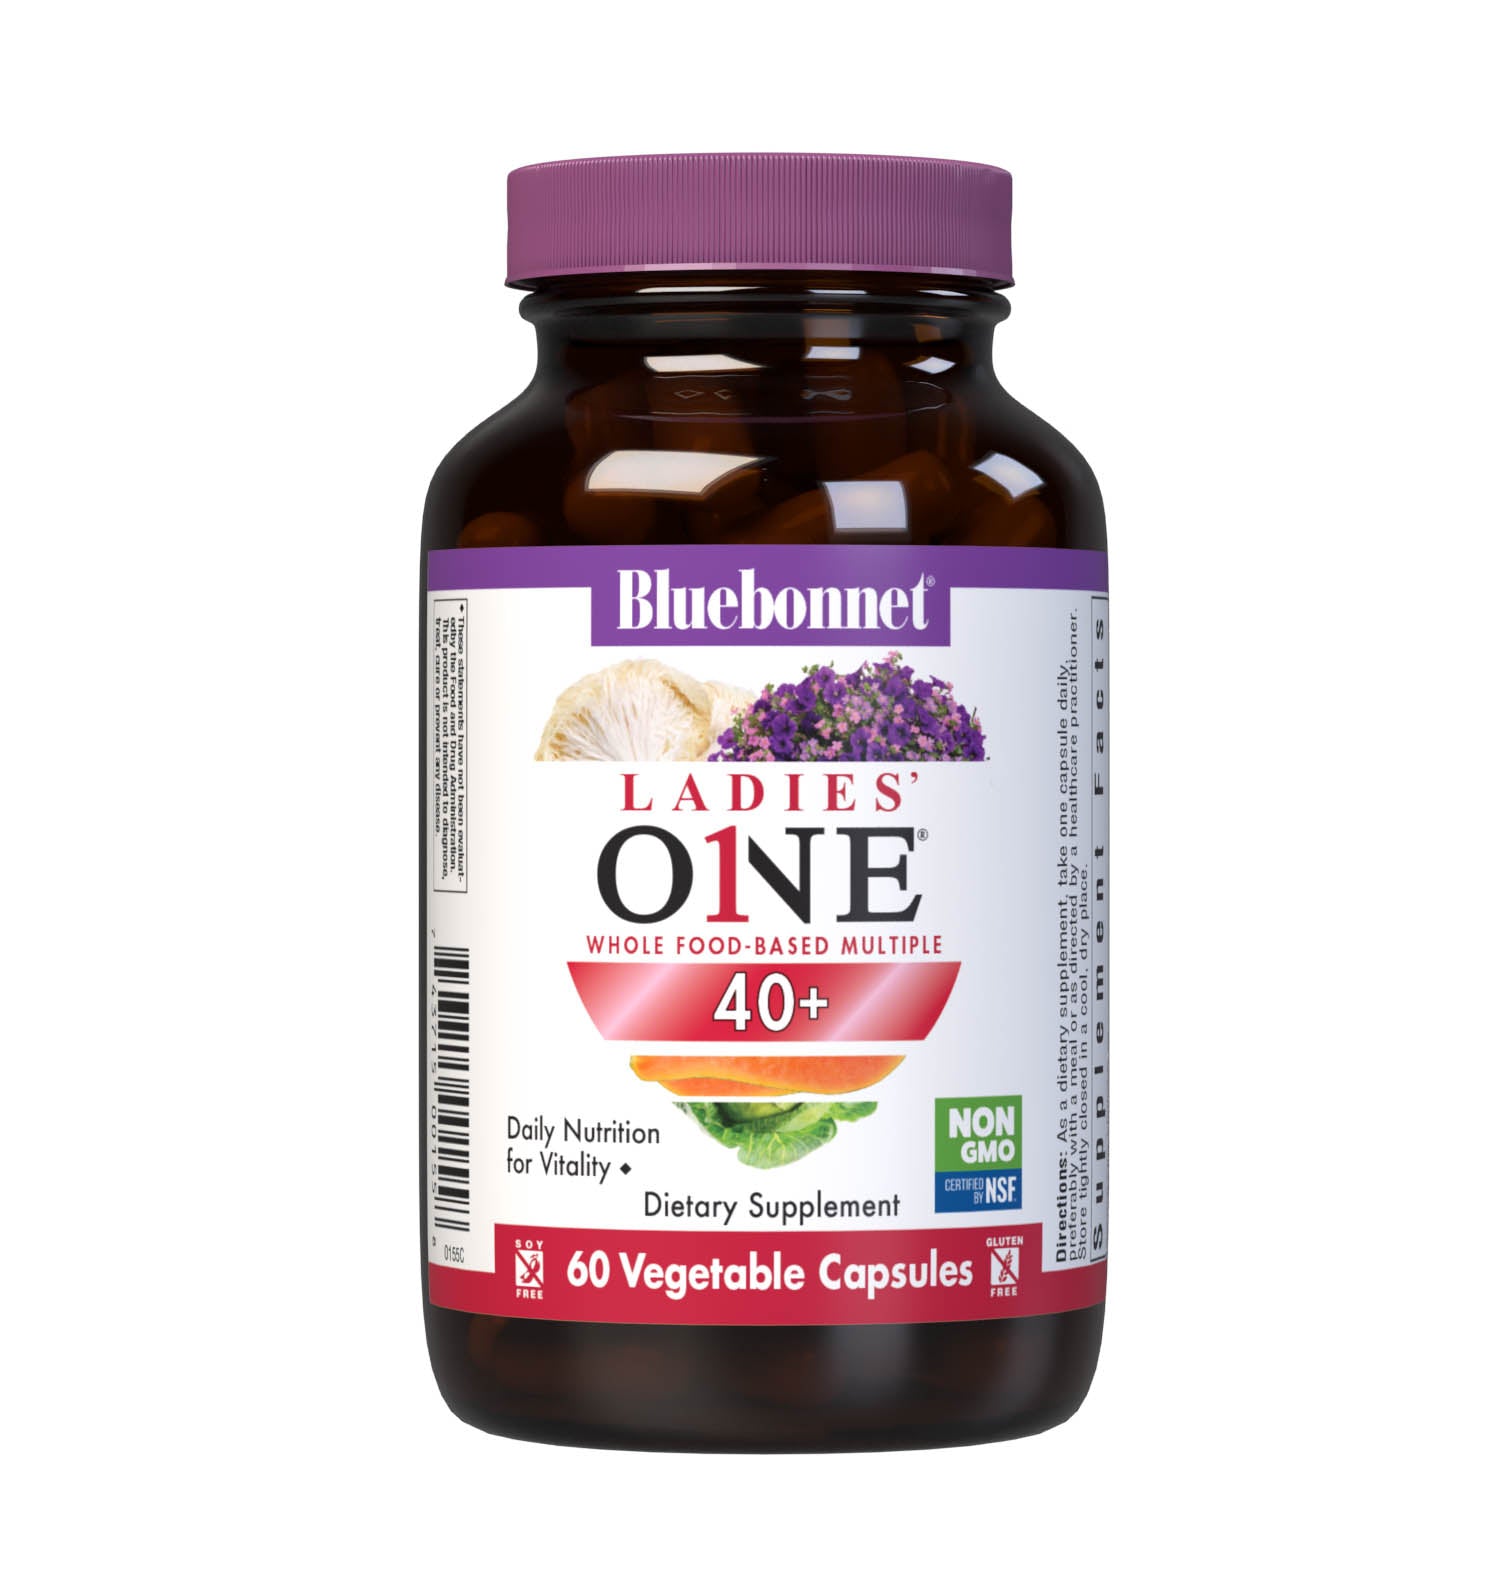 Bluebonnet’s Ladies’ ONE 40+ Whole Food-Based Multiple 60 Vegetable Capsules are formulated for daily nutritional support and vitality for women over 40. Helps to increase energy and vitality, protect beautiful skin, enhance mood, and support heart health. #size_60 count